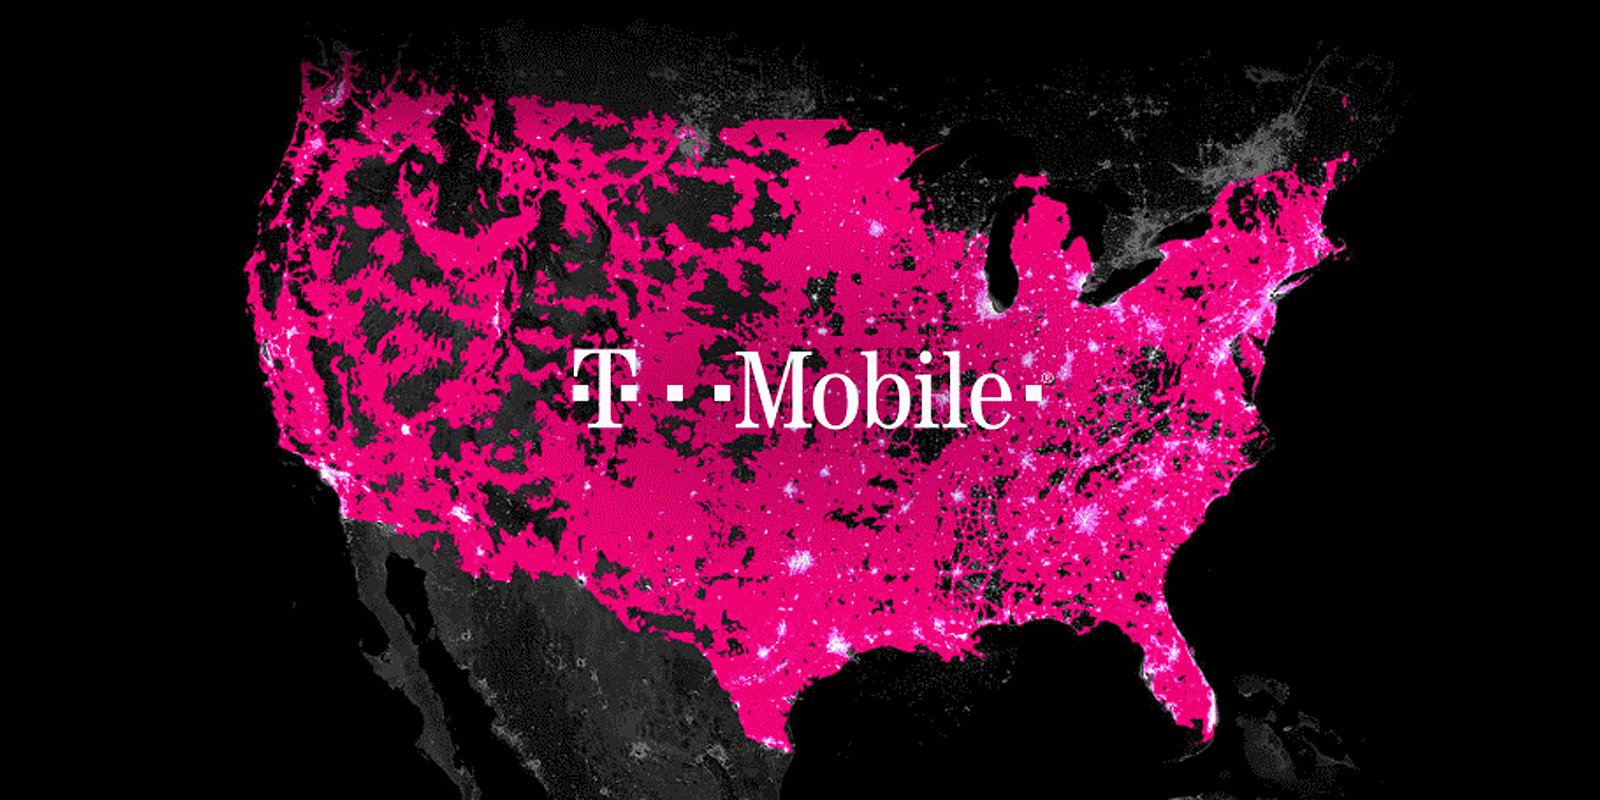 data-breach-at-t-mobile-may-have-impacted-phone-numbers,-call-records-of-up-to-200,000-users